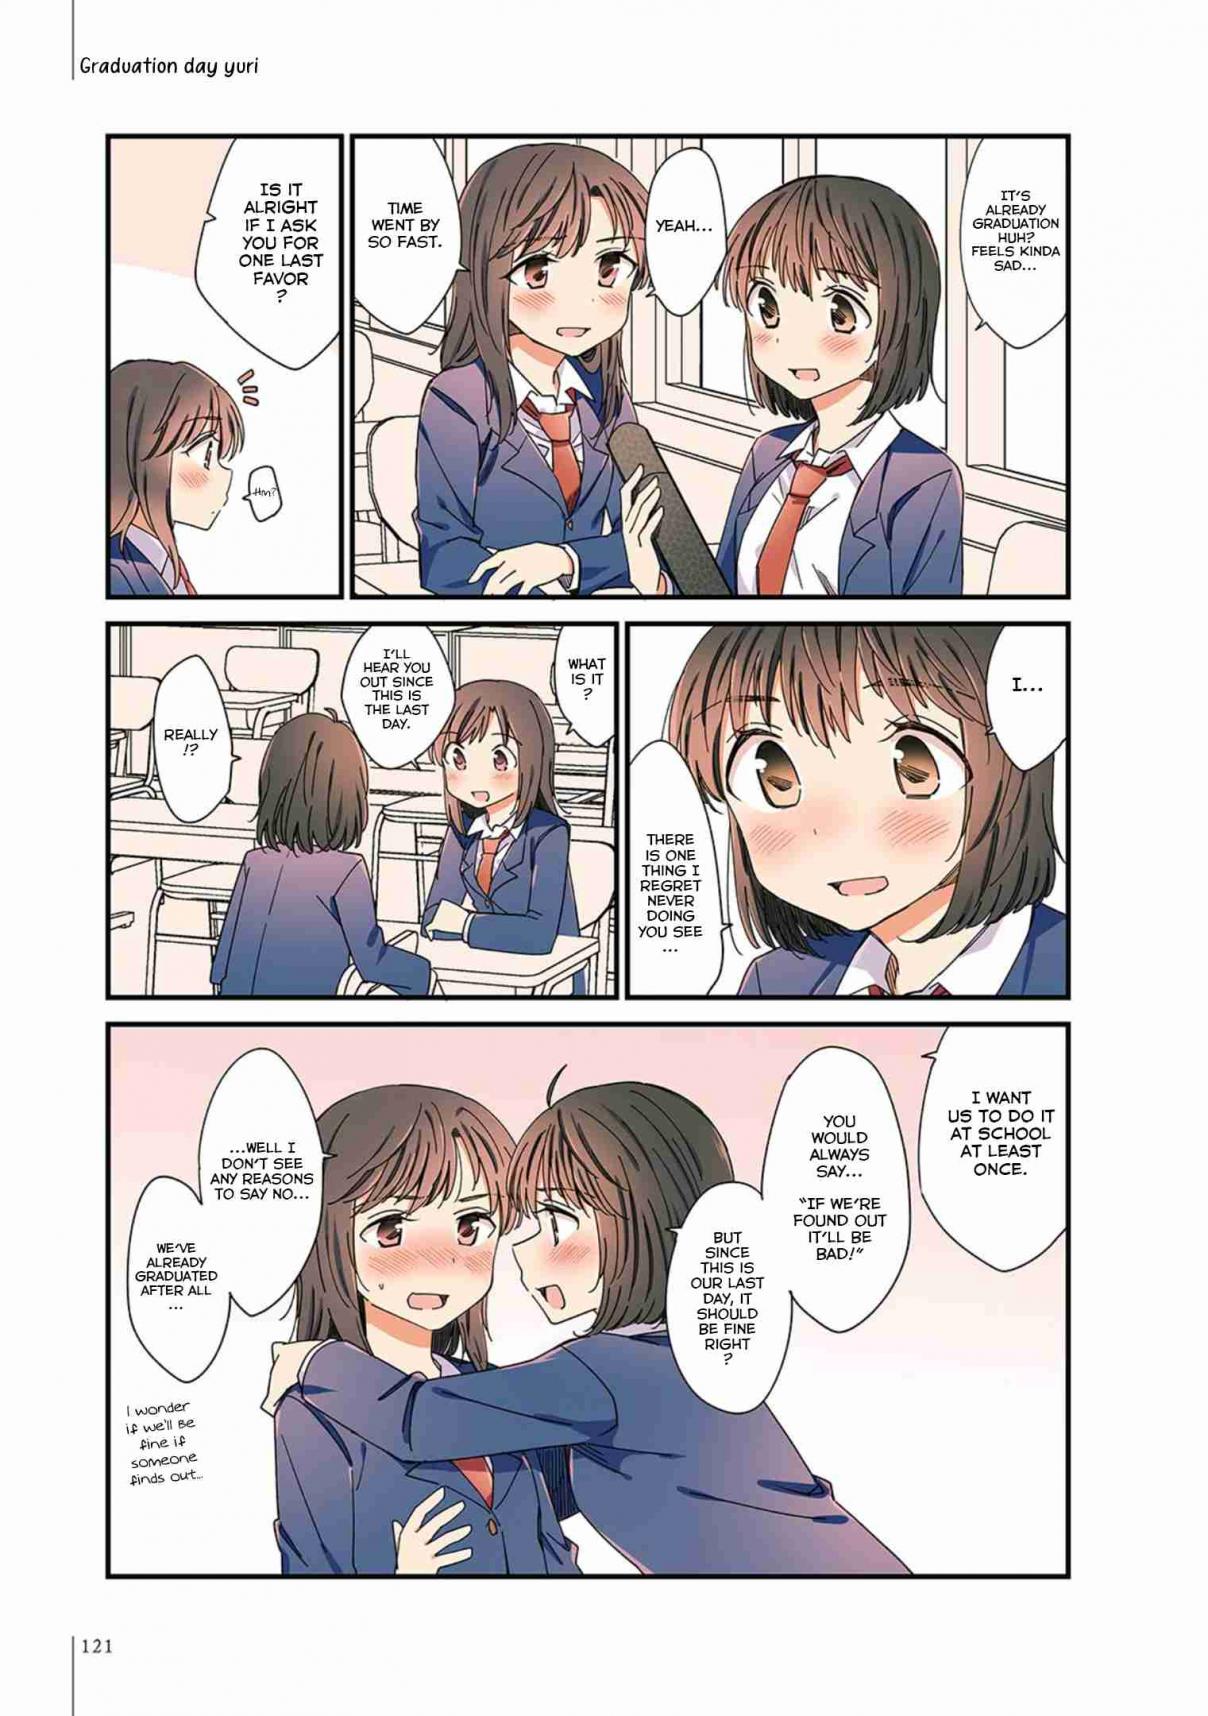 A Hundred Scenes of Girls Love Vol. 2 Ch. 18 March